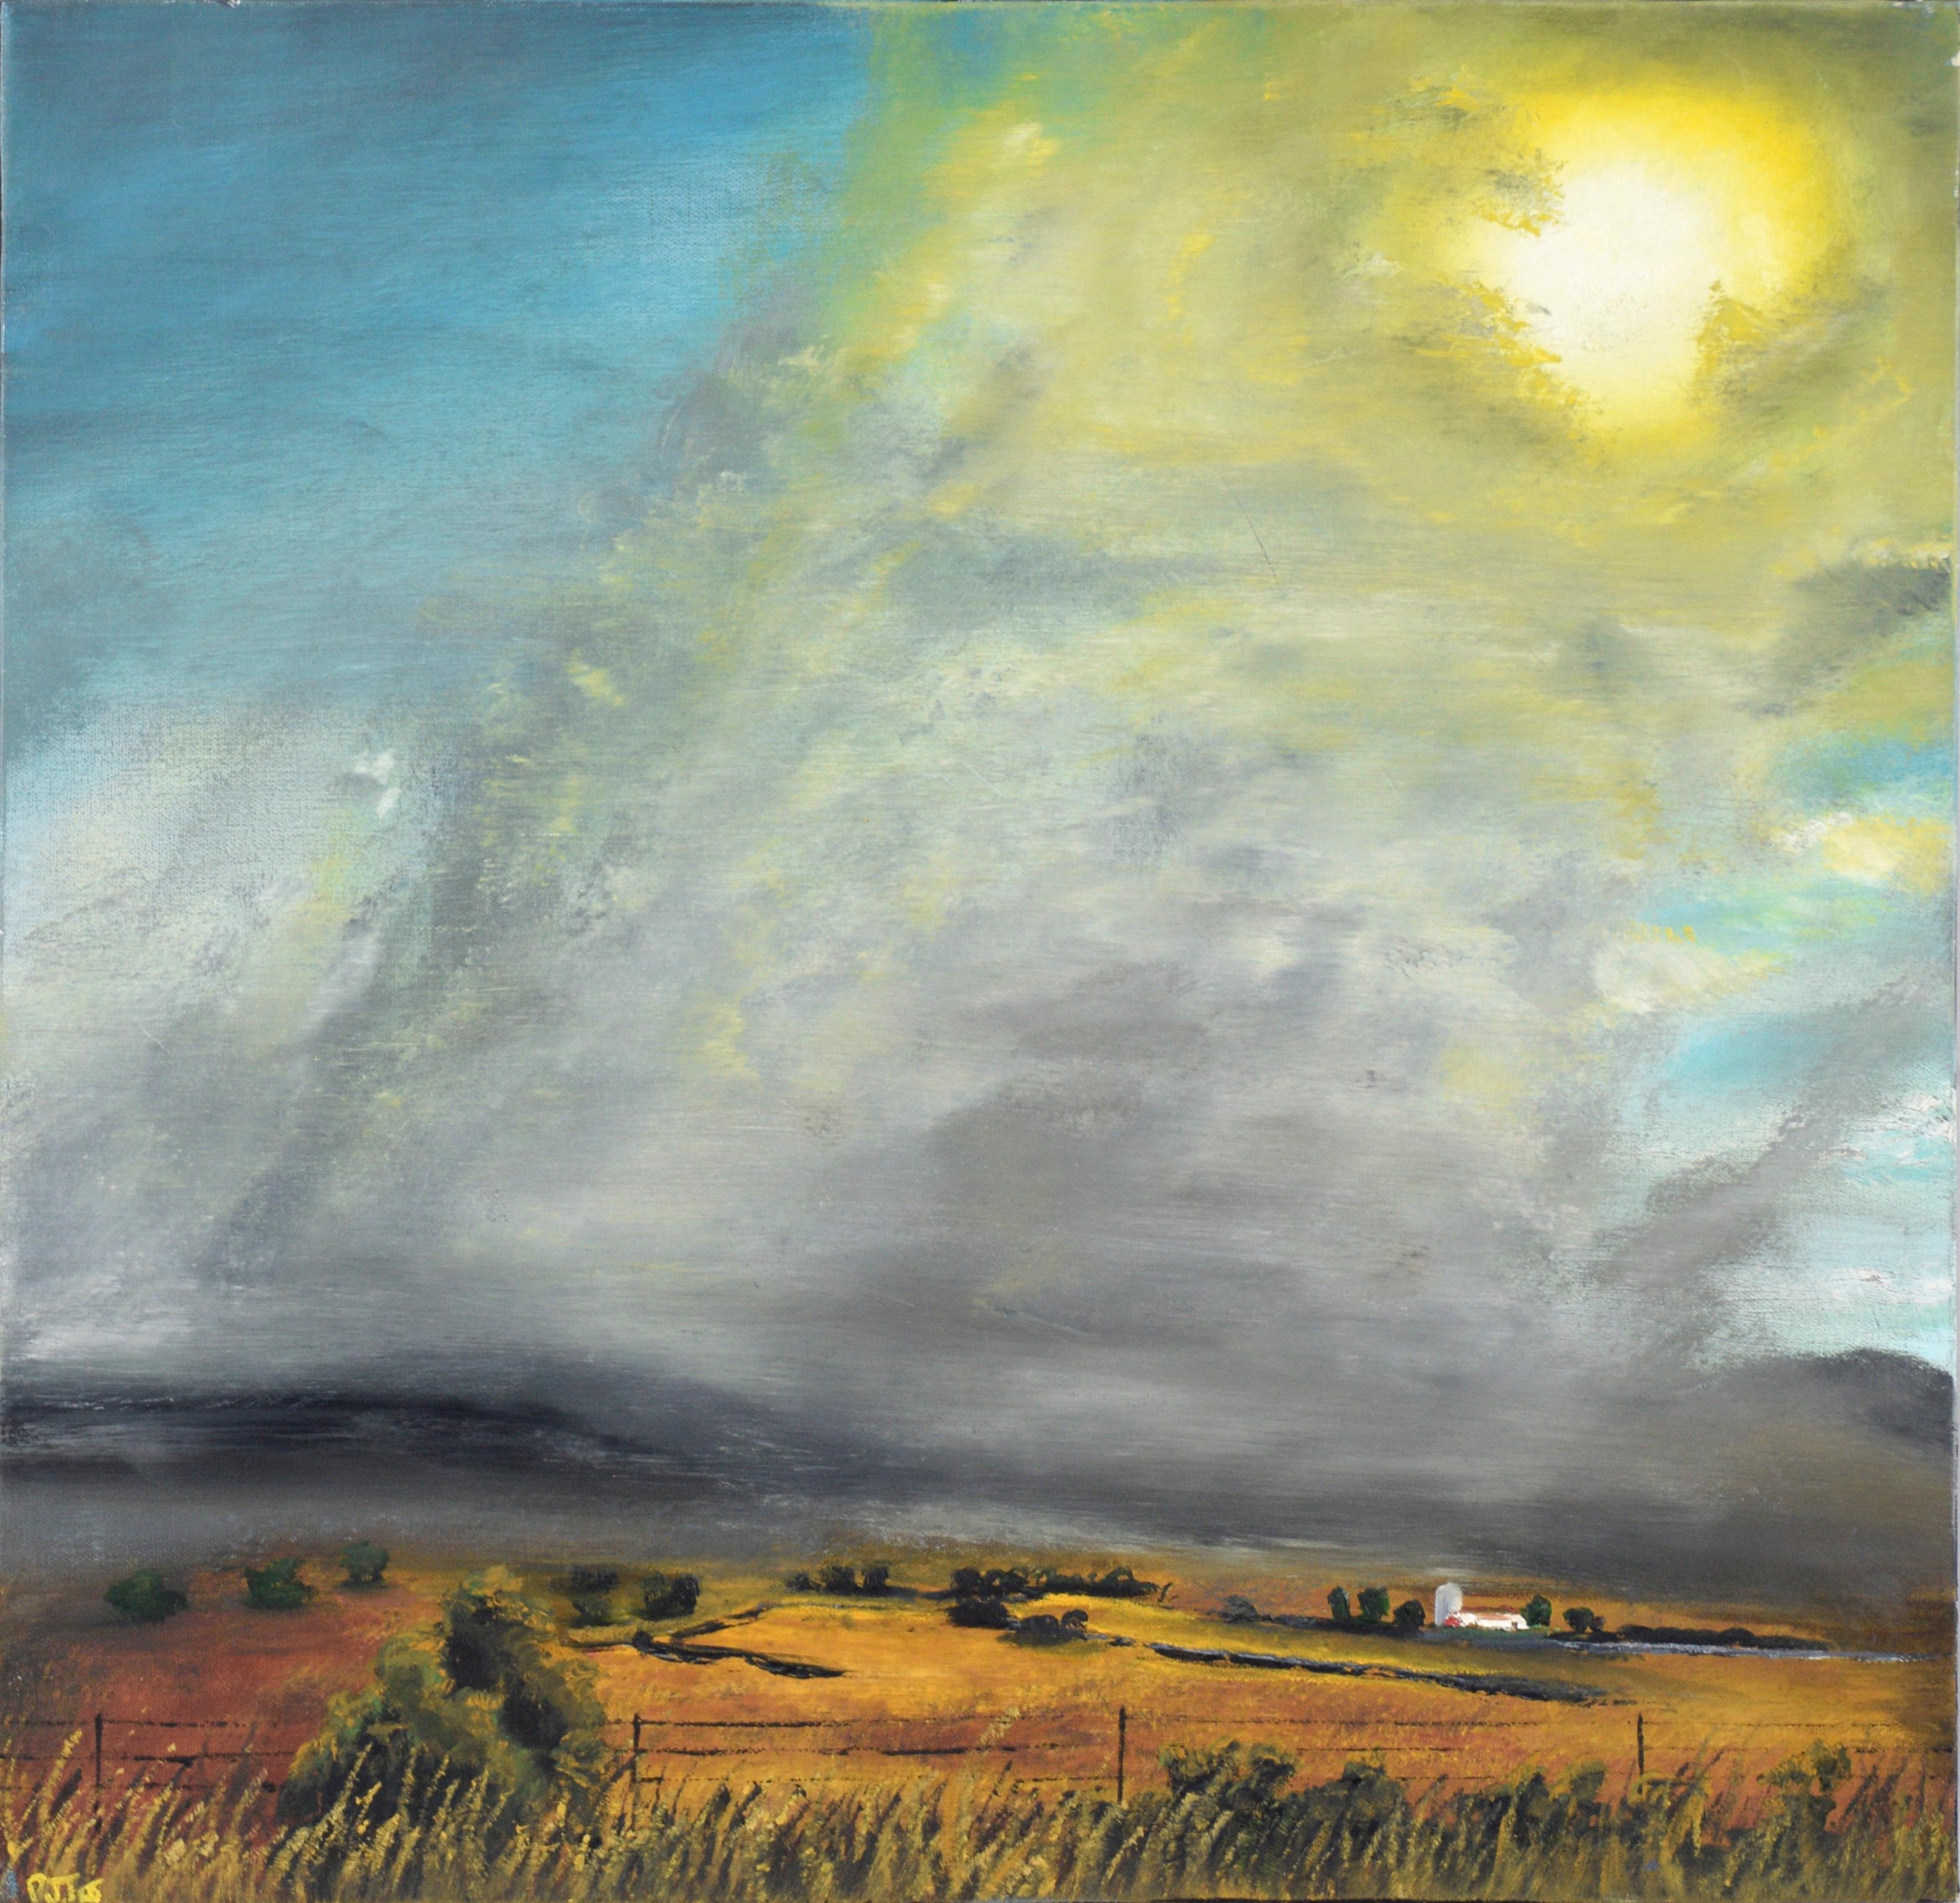 "Drought" Low-Horizon Midwest Landscape in Oil on Canvas